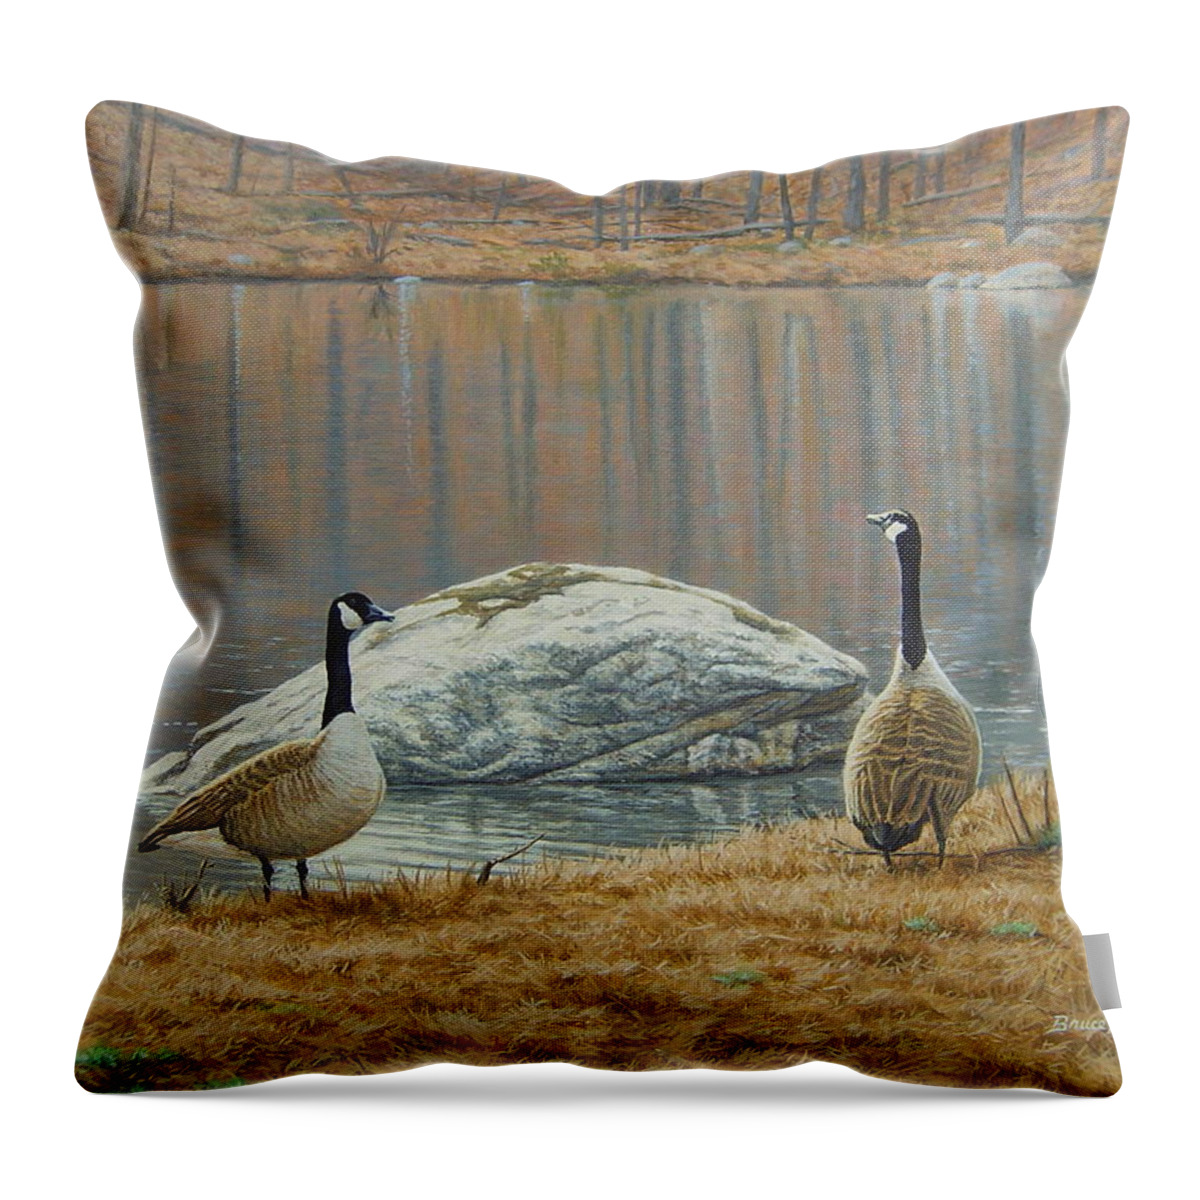 Wildlife Throw Pillow featuring the painting South Carolina Geese by Bruce Dumas